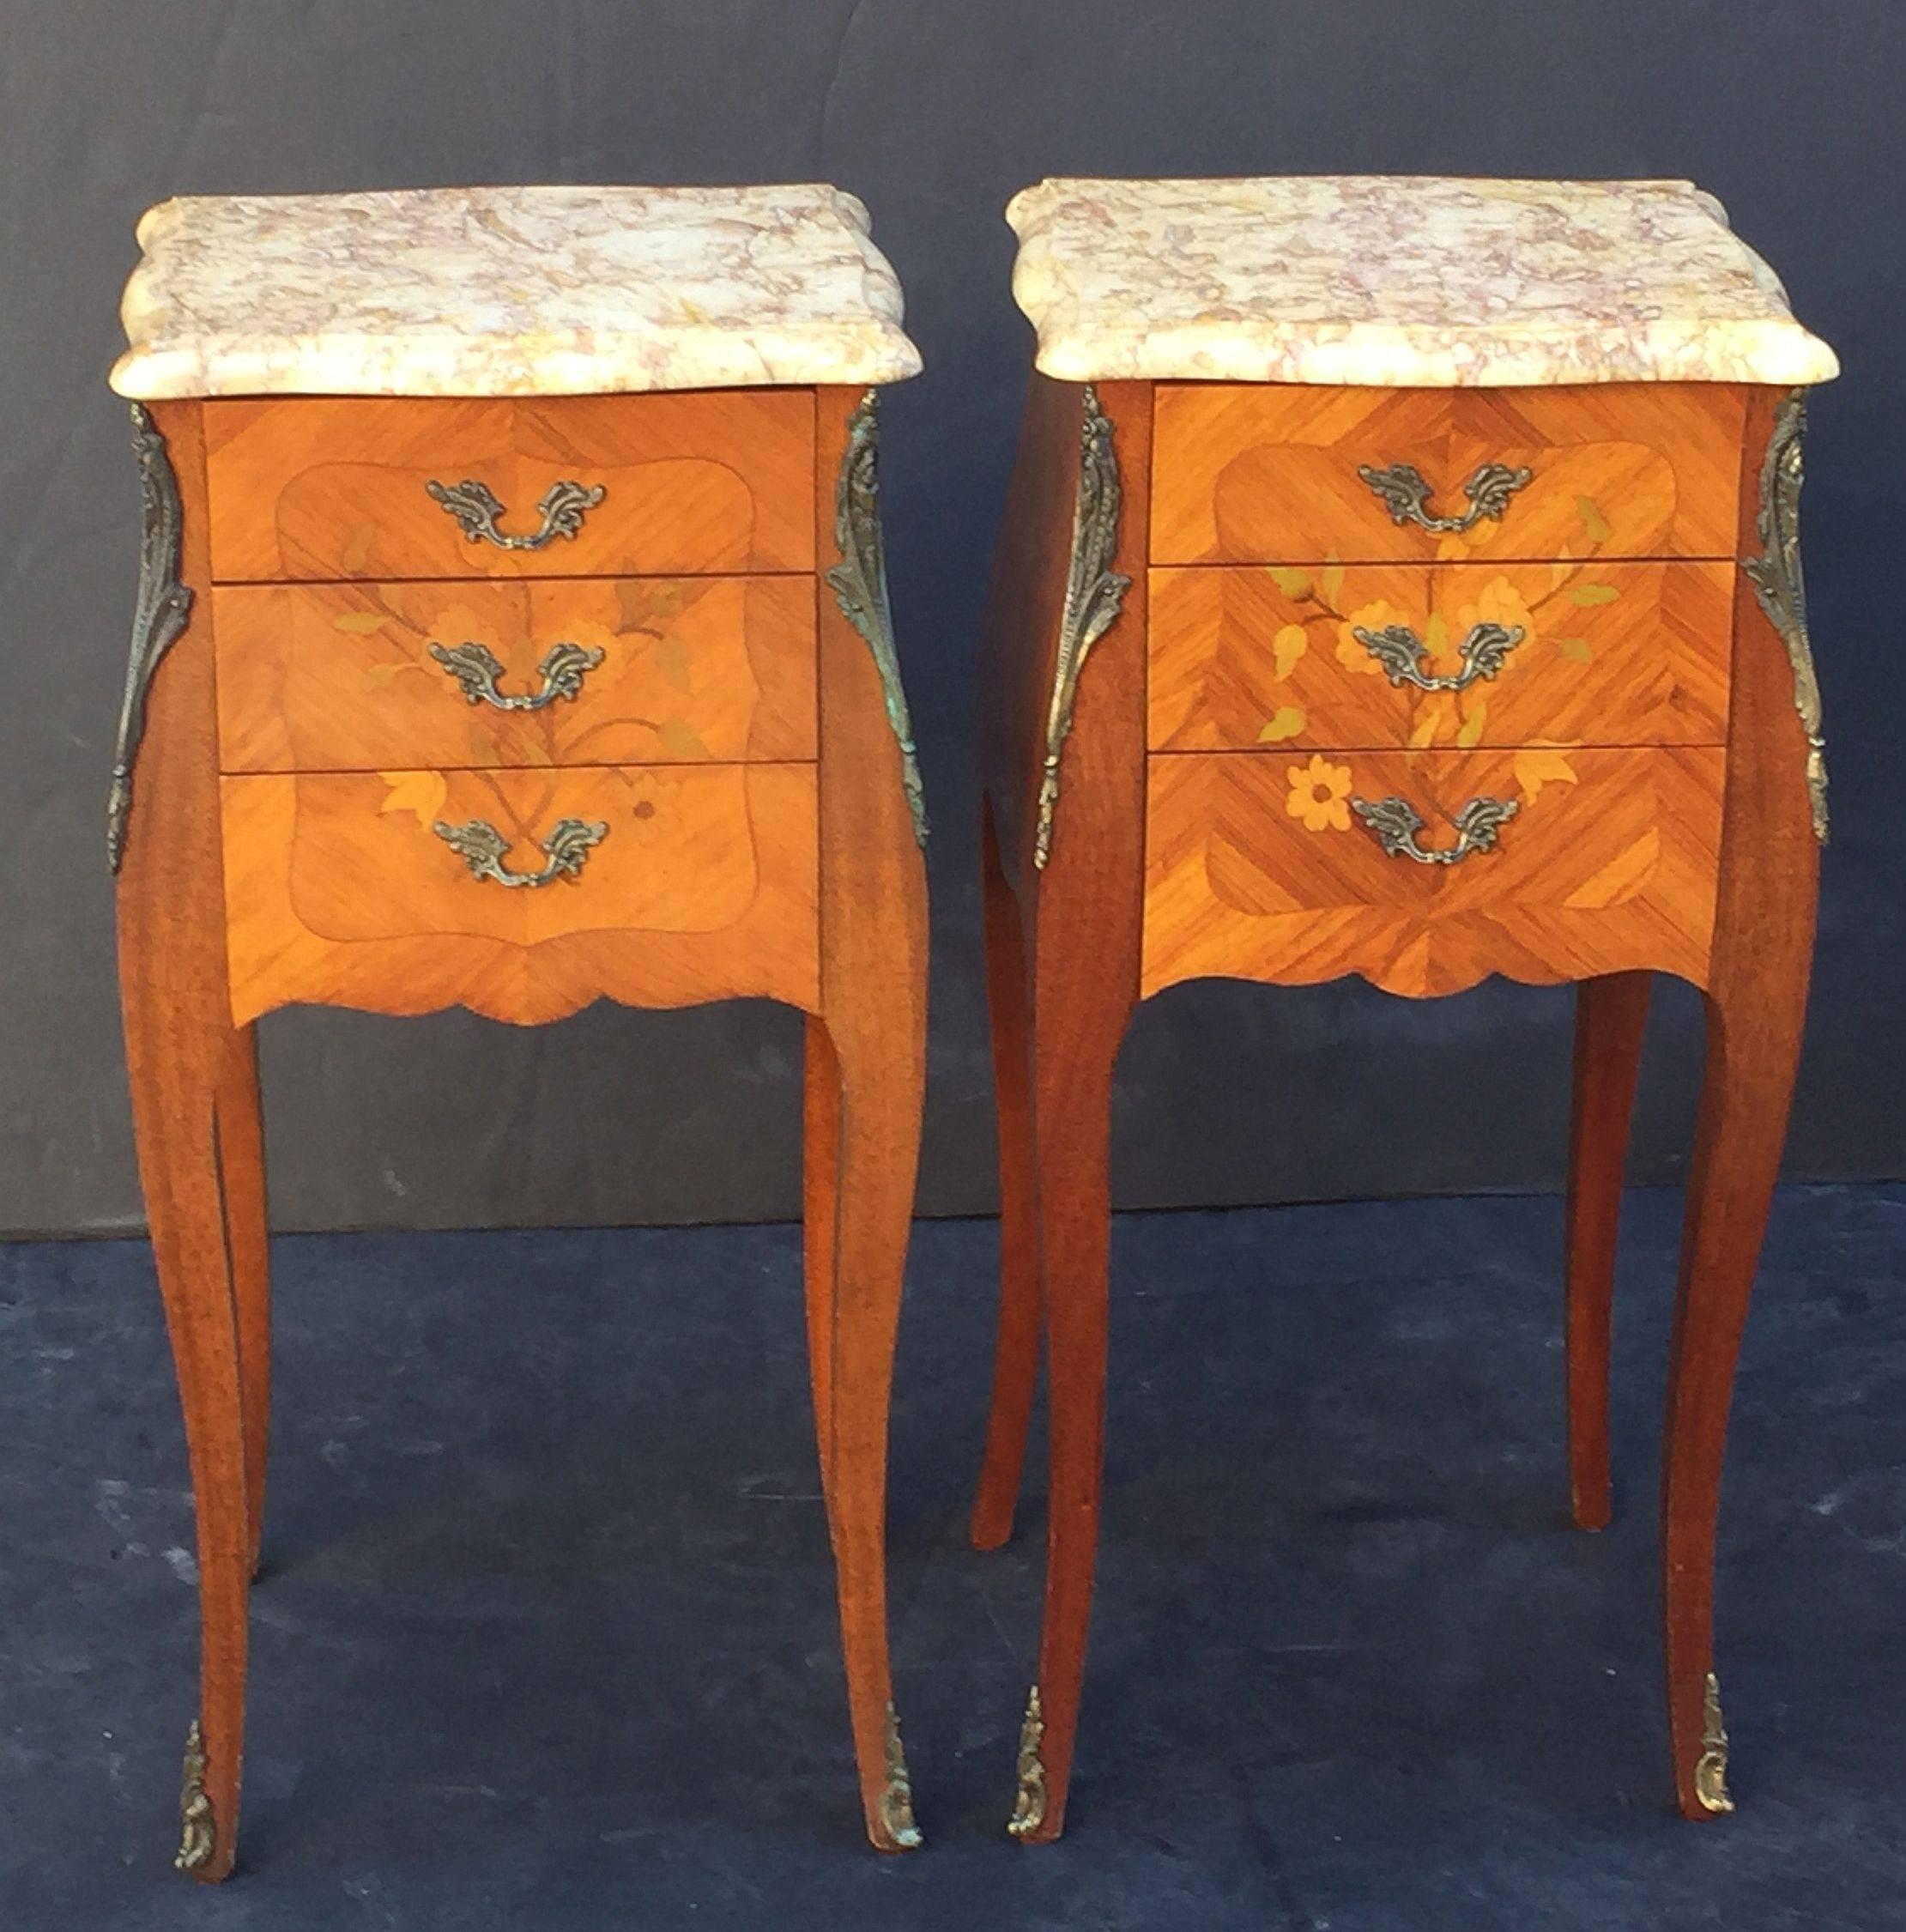 Inlay Pair of French Inlaid Nightstands or Bedside Tables